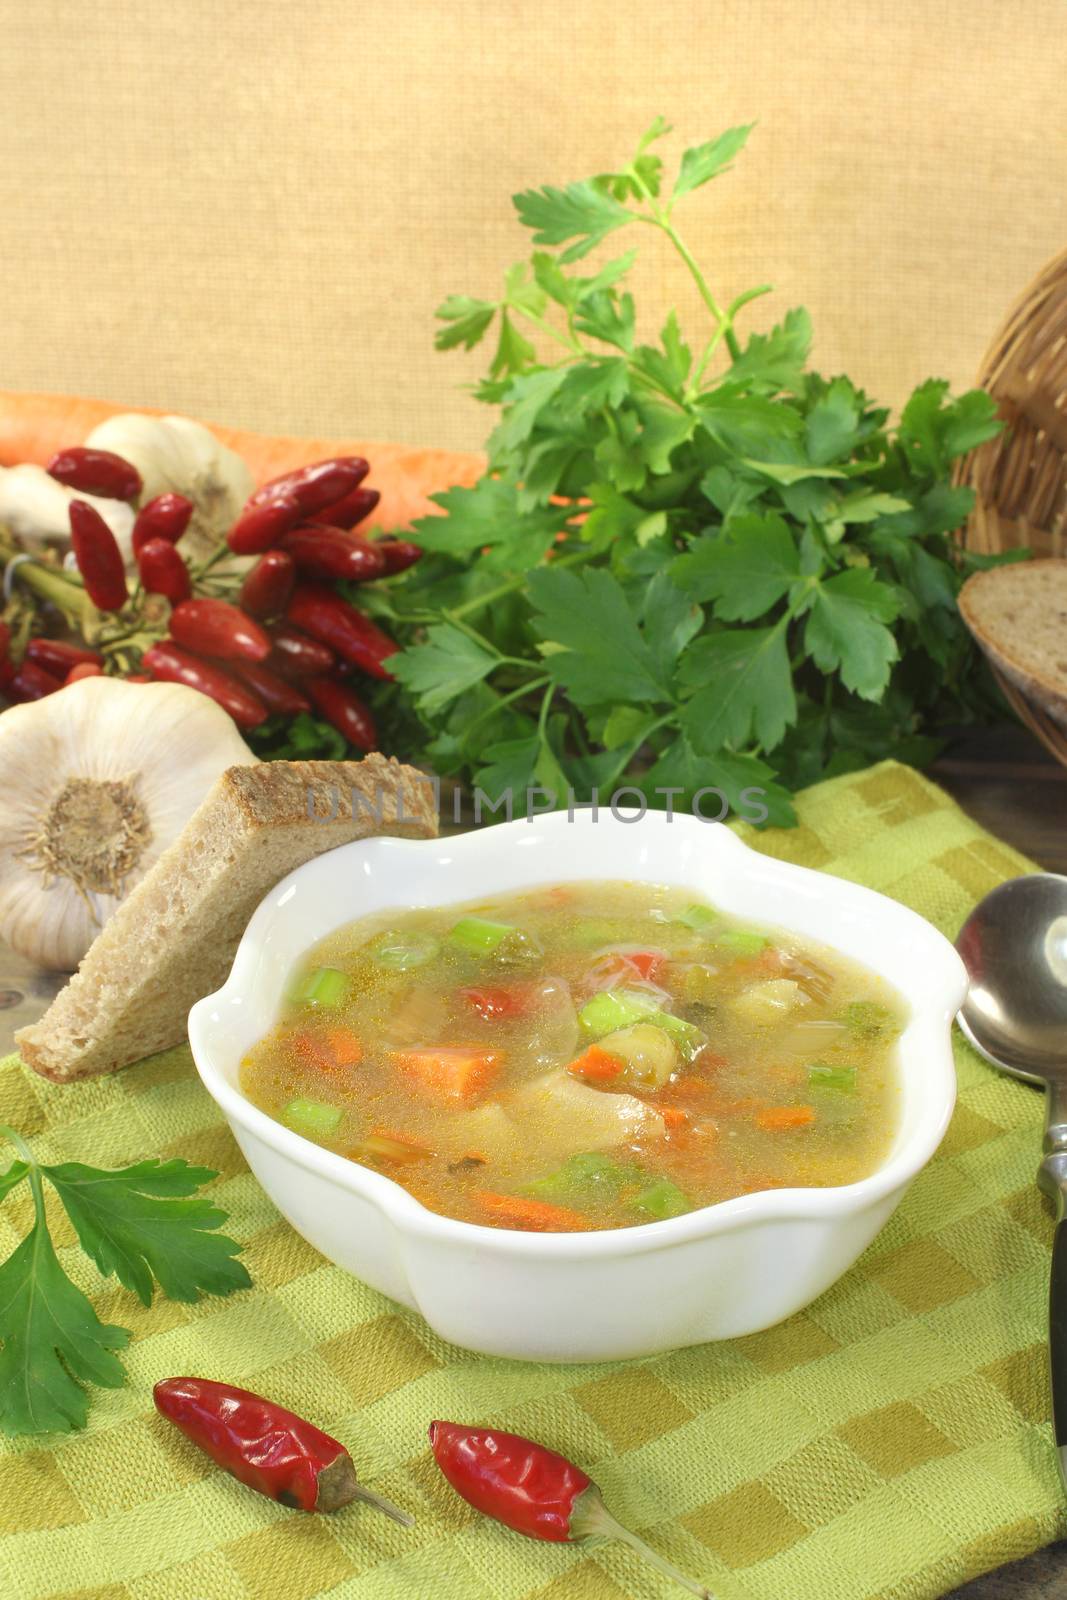 Poultry consomme with smooth parsley by discovery